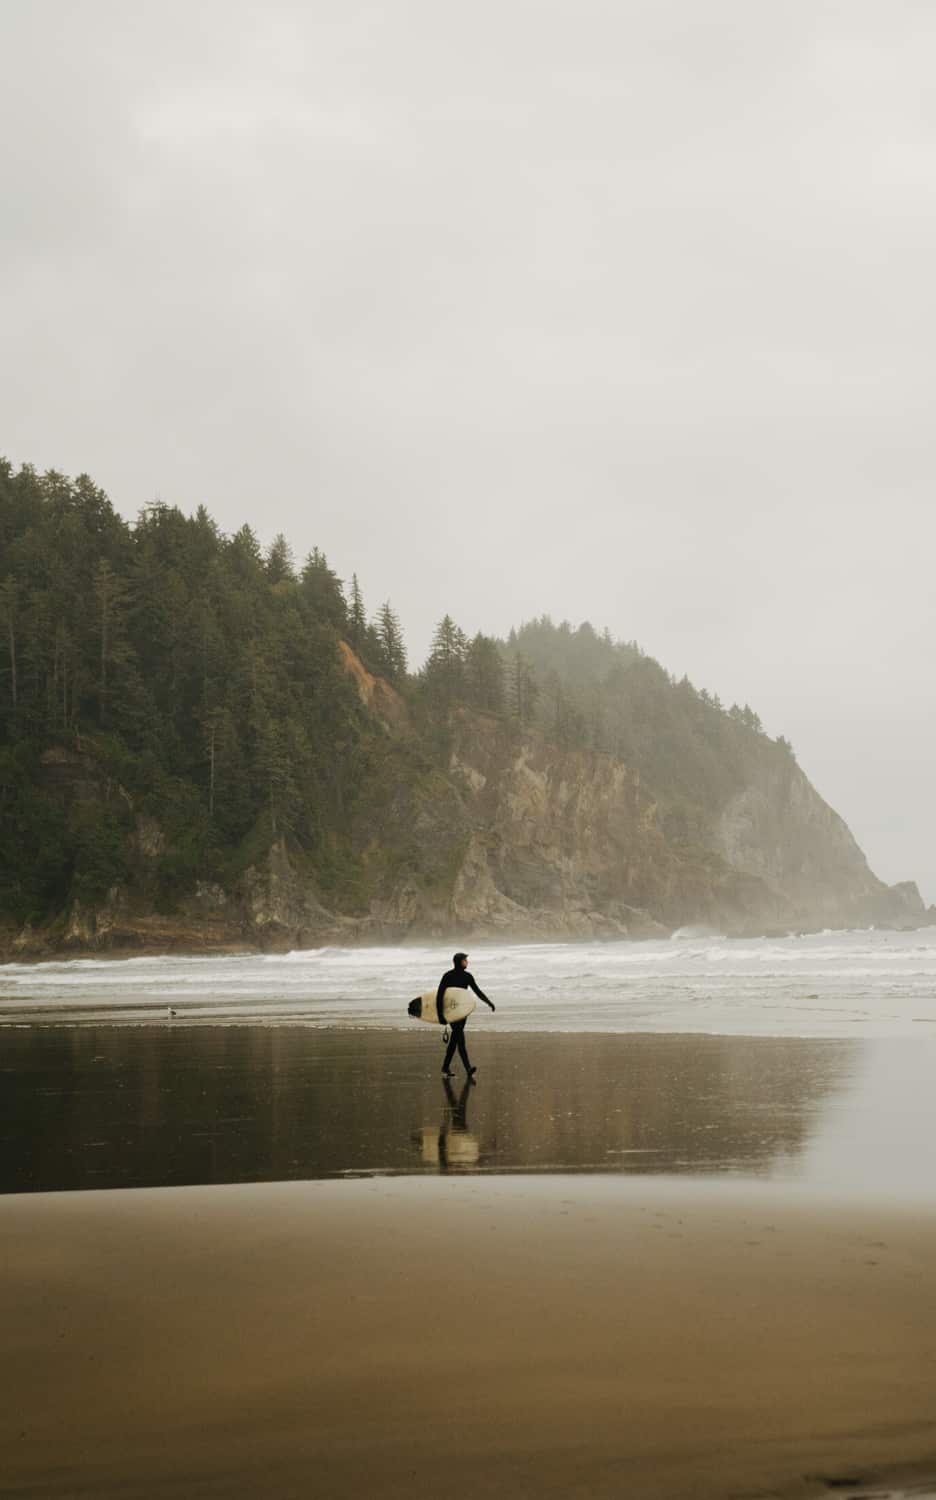 A surfer at Short Sands Beach is walking into the ocean water.